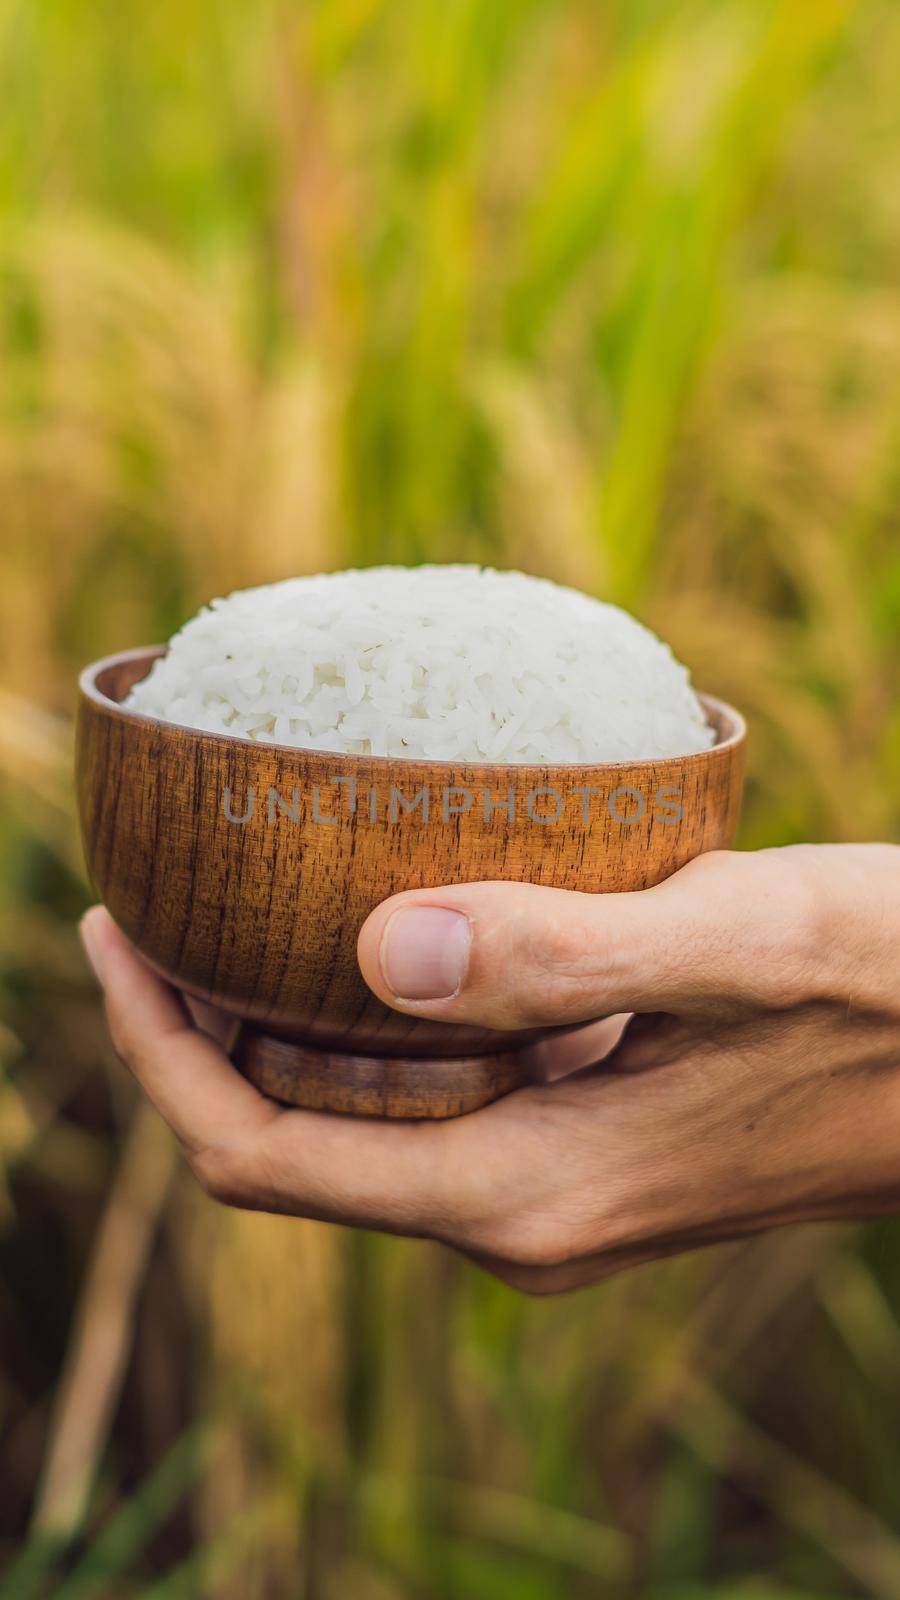 The hand holds a cup of boiled rice in a wooden cup, against the background of a ripe rice field. VERTICAL FORMAT for Instagram mobile story or stories size. Mobile wallpaper